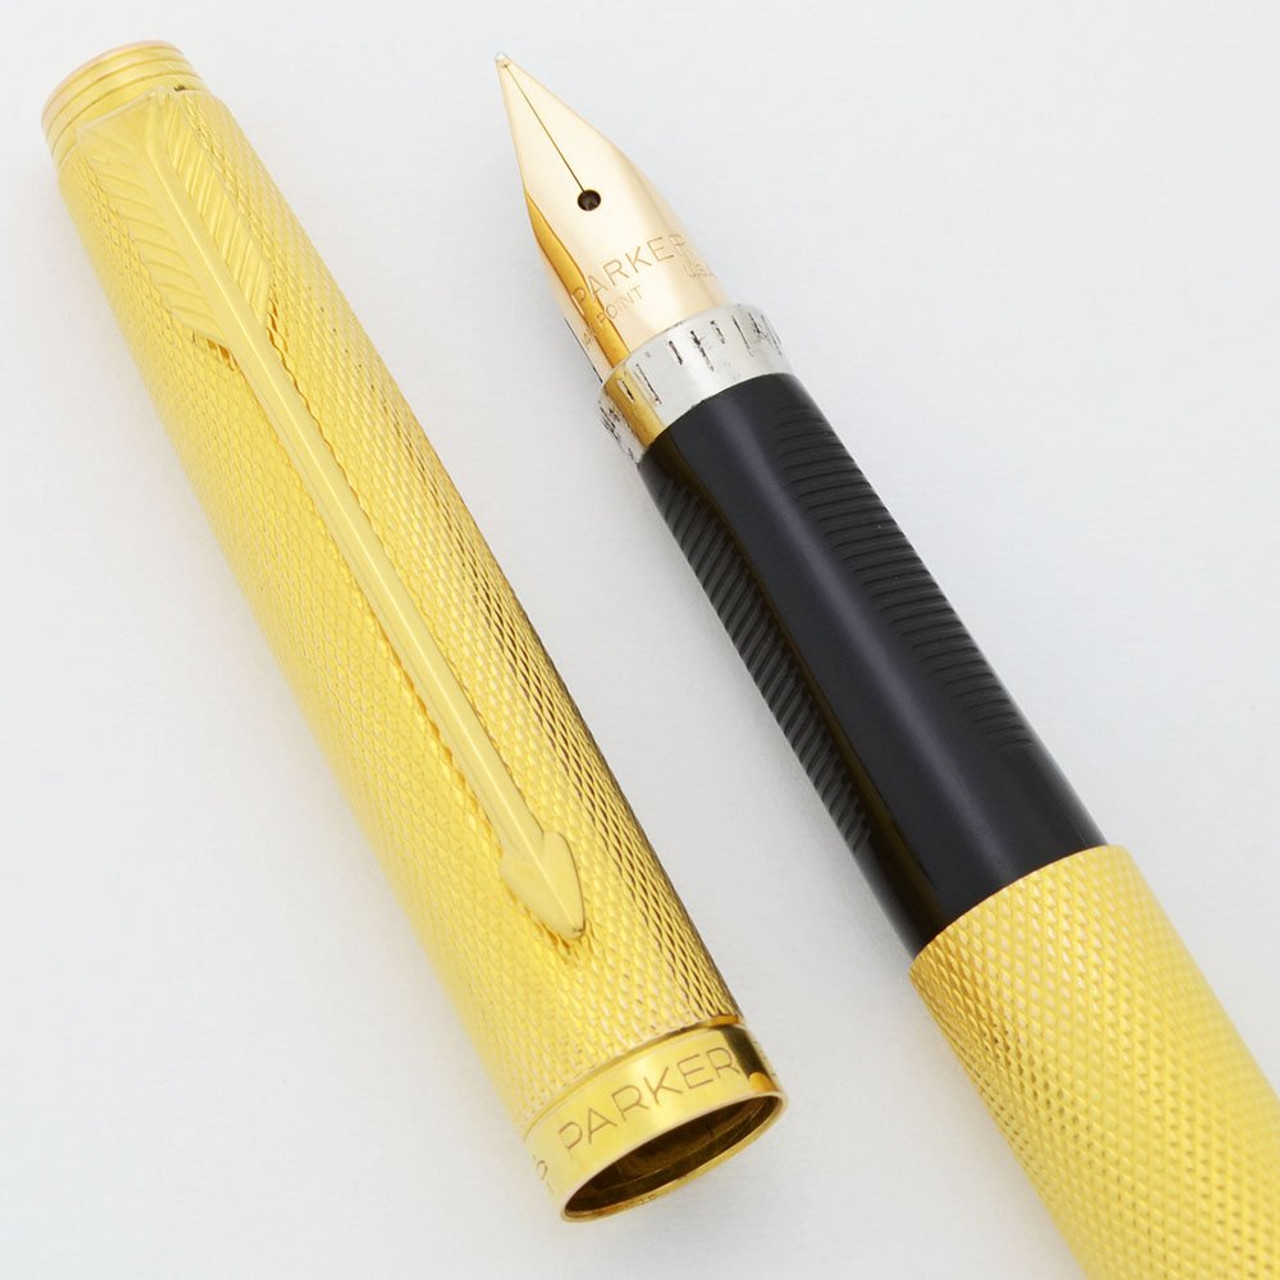 Parker 75 Fountain Pen - Gold Plated Grain d'Orge (Barleycorn), Flat Tassies, 14k Extra Fine  (Excellent +, Work Well)